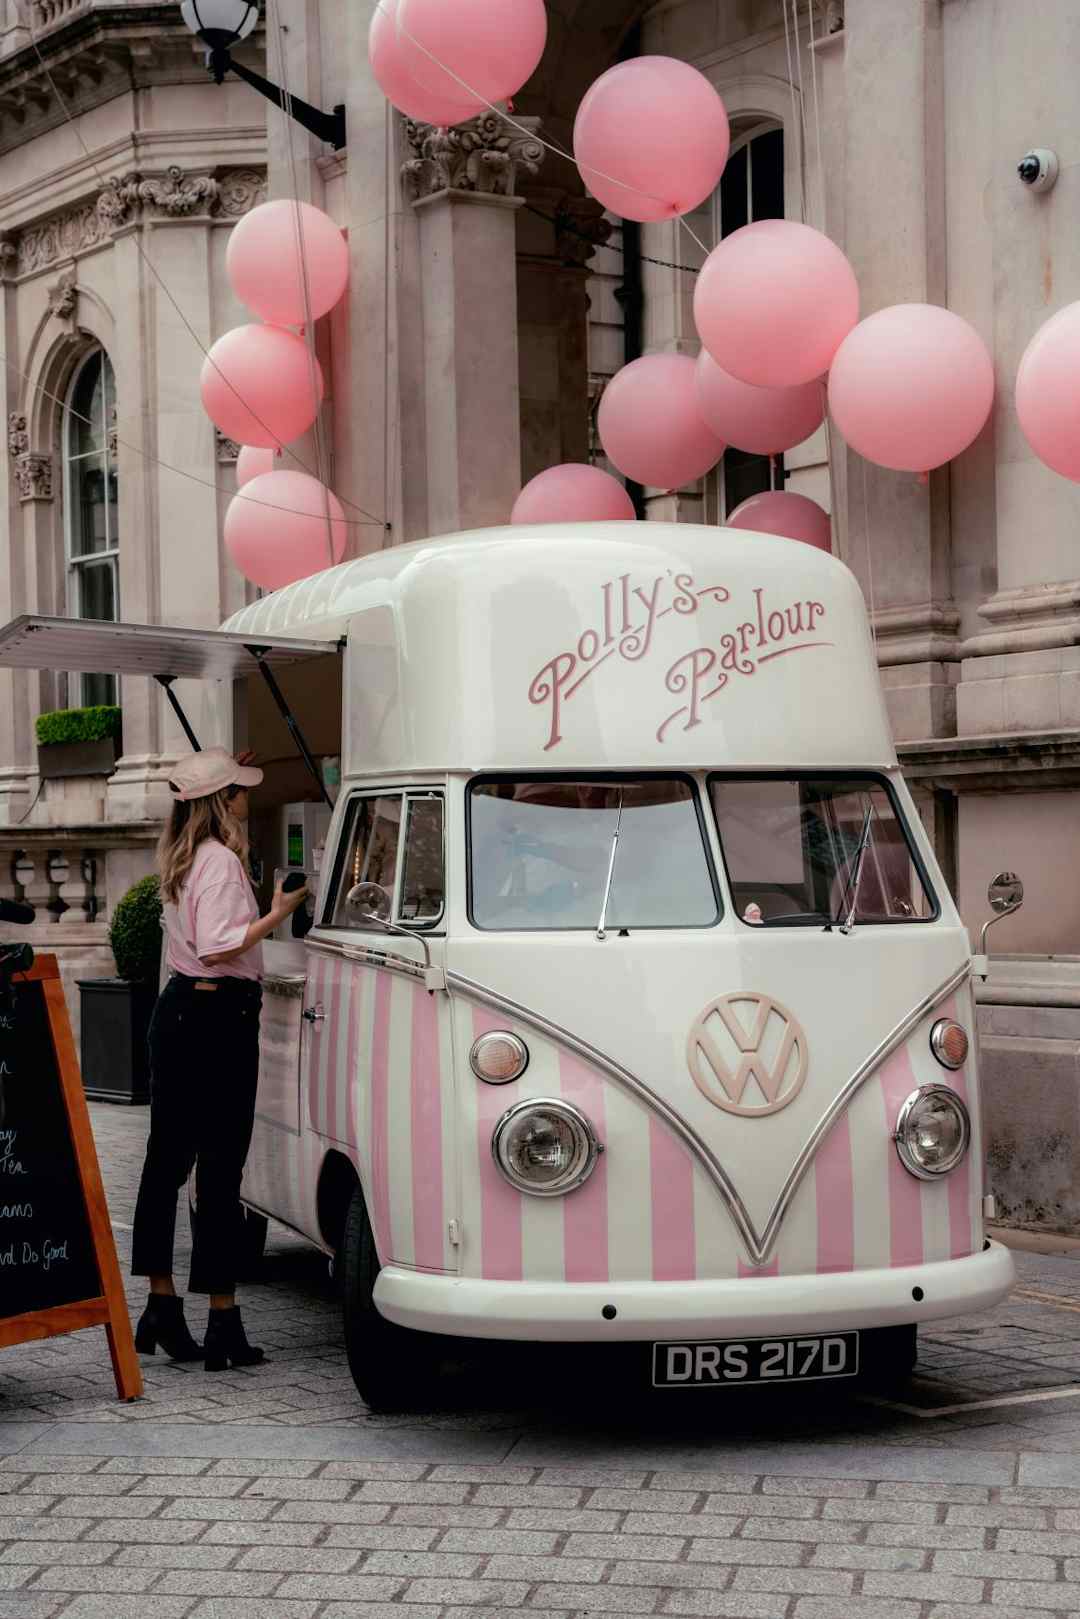 Hero image for supplier Polly's Vintage Ice Cream Parlour